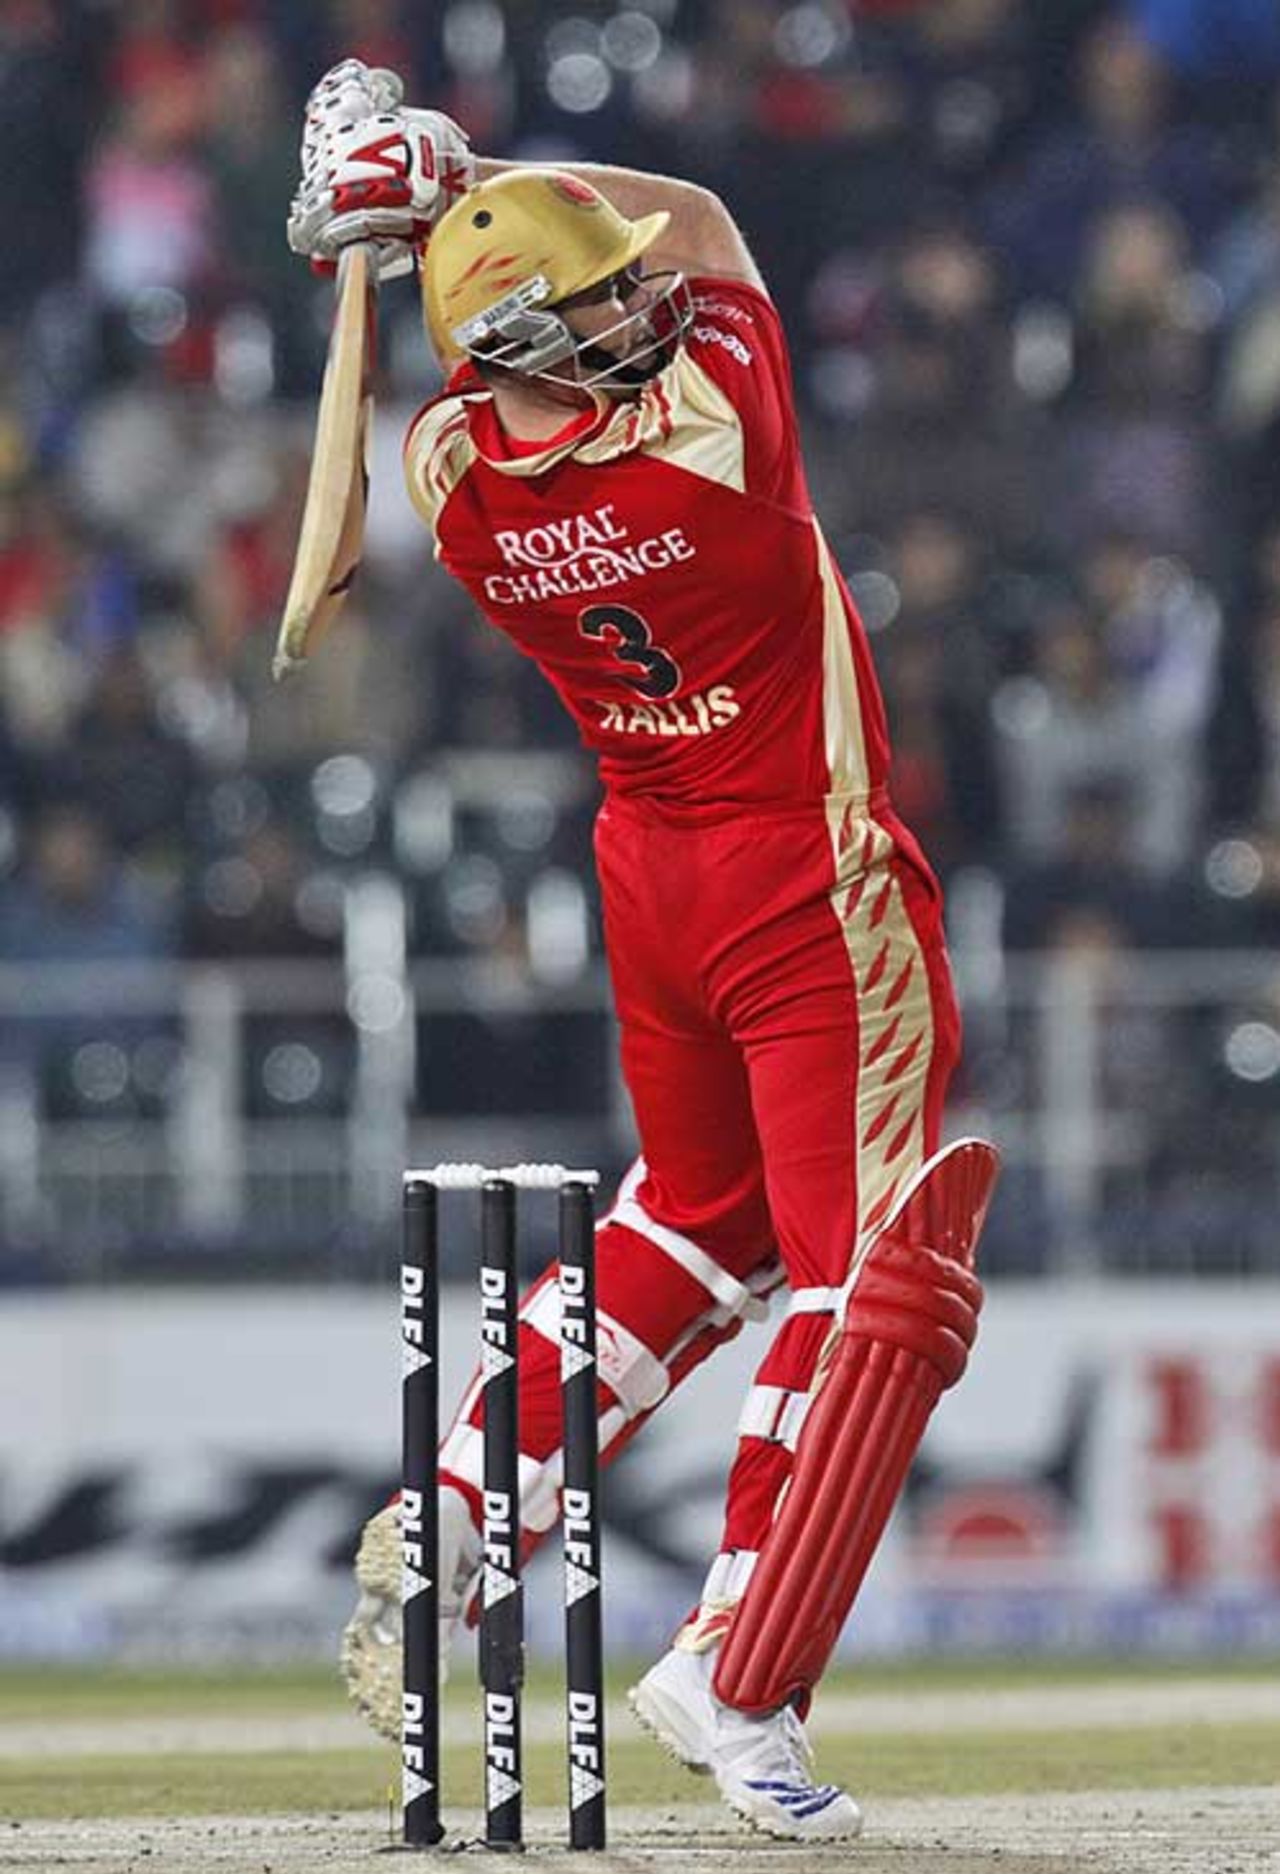 Jacques Kallis gets up to try and thrash the ball, Bangalore Royal Challengers v Chennai Super Kings, IPL, second semi-final, Johannesburg, May 23, 2009